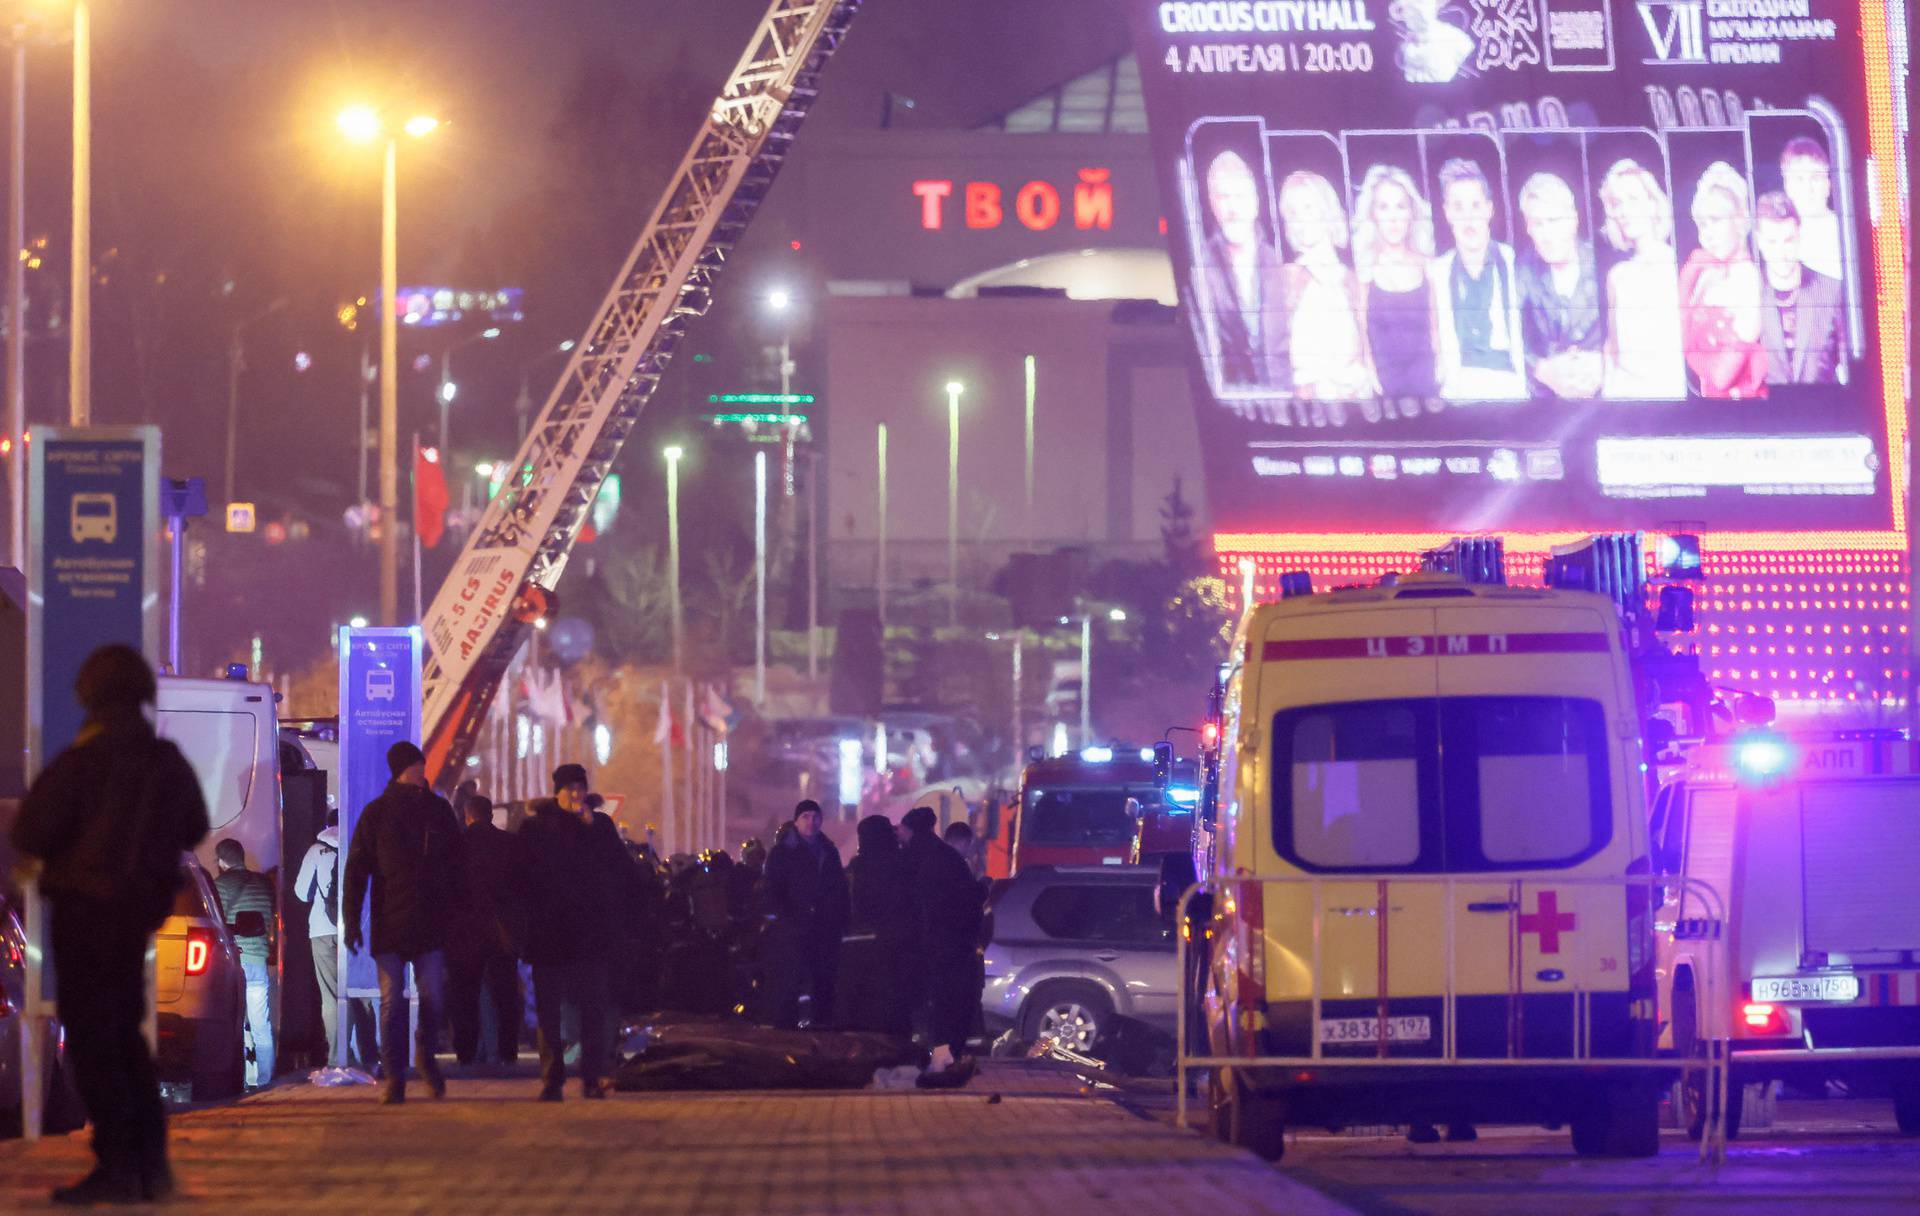 Gunmen open fire at people at concert hall near Moscow